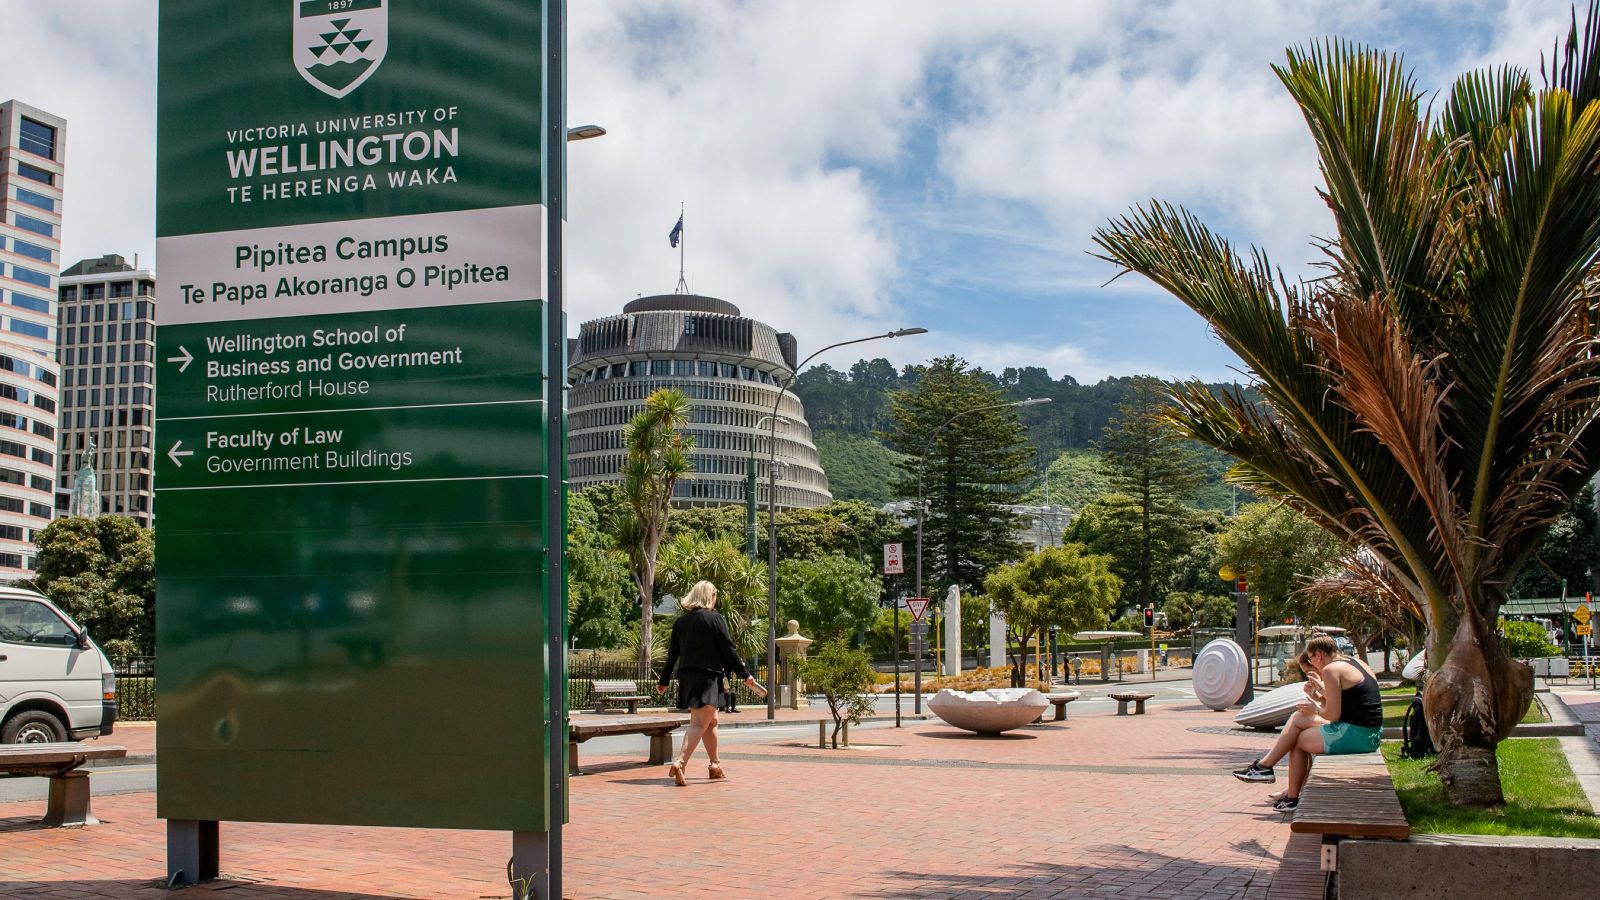 View of signage for University campus with parliament building in the distance